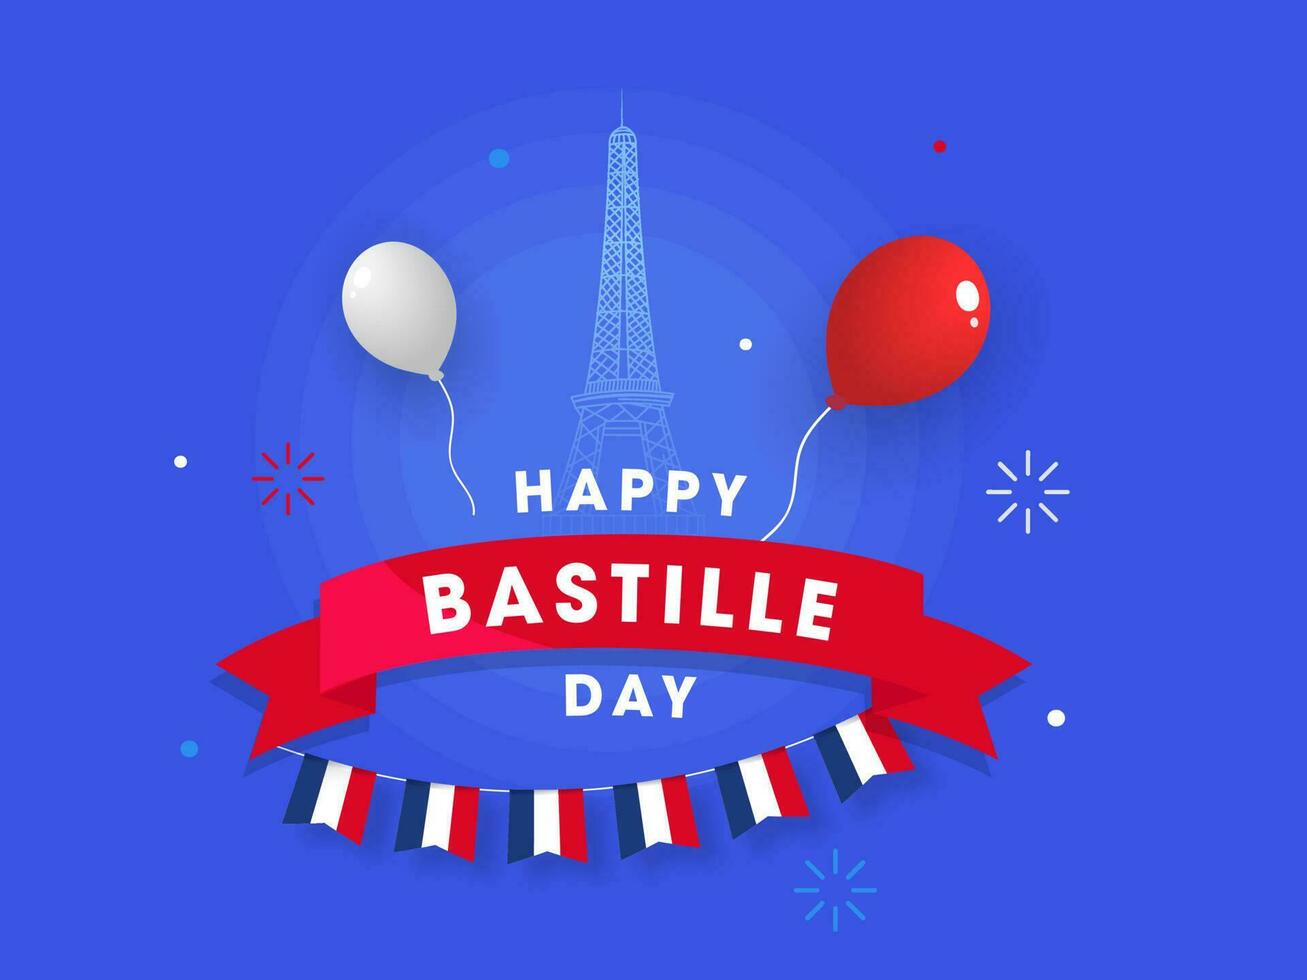 Happy Bastille Day Text with Balloons and Bunting Flags on Eiffel Tower Blue Background. vector